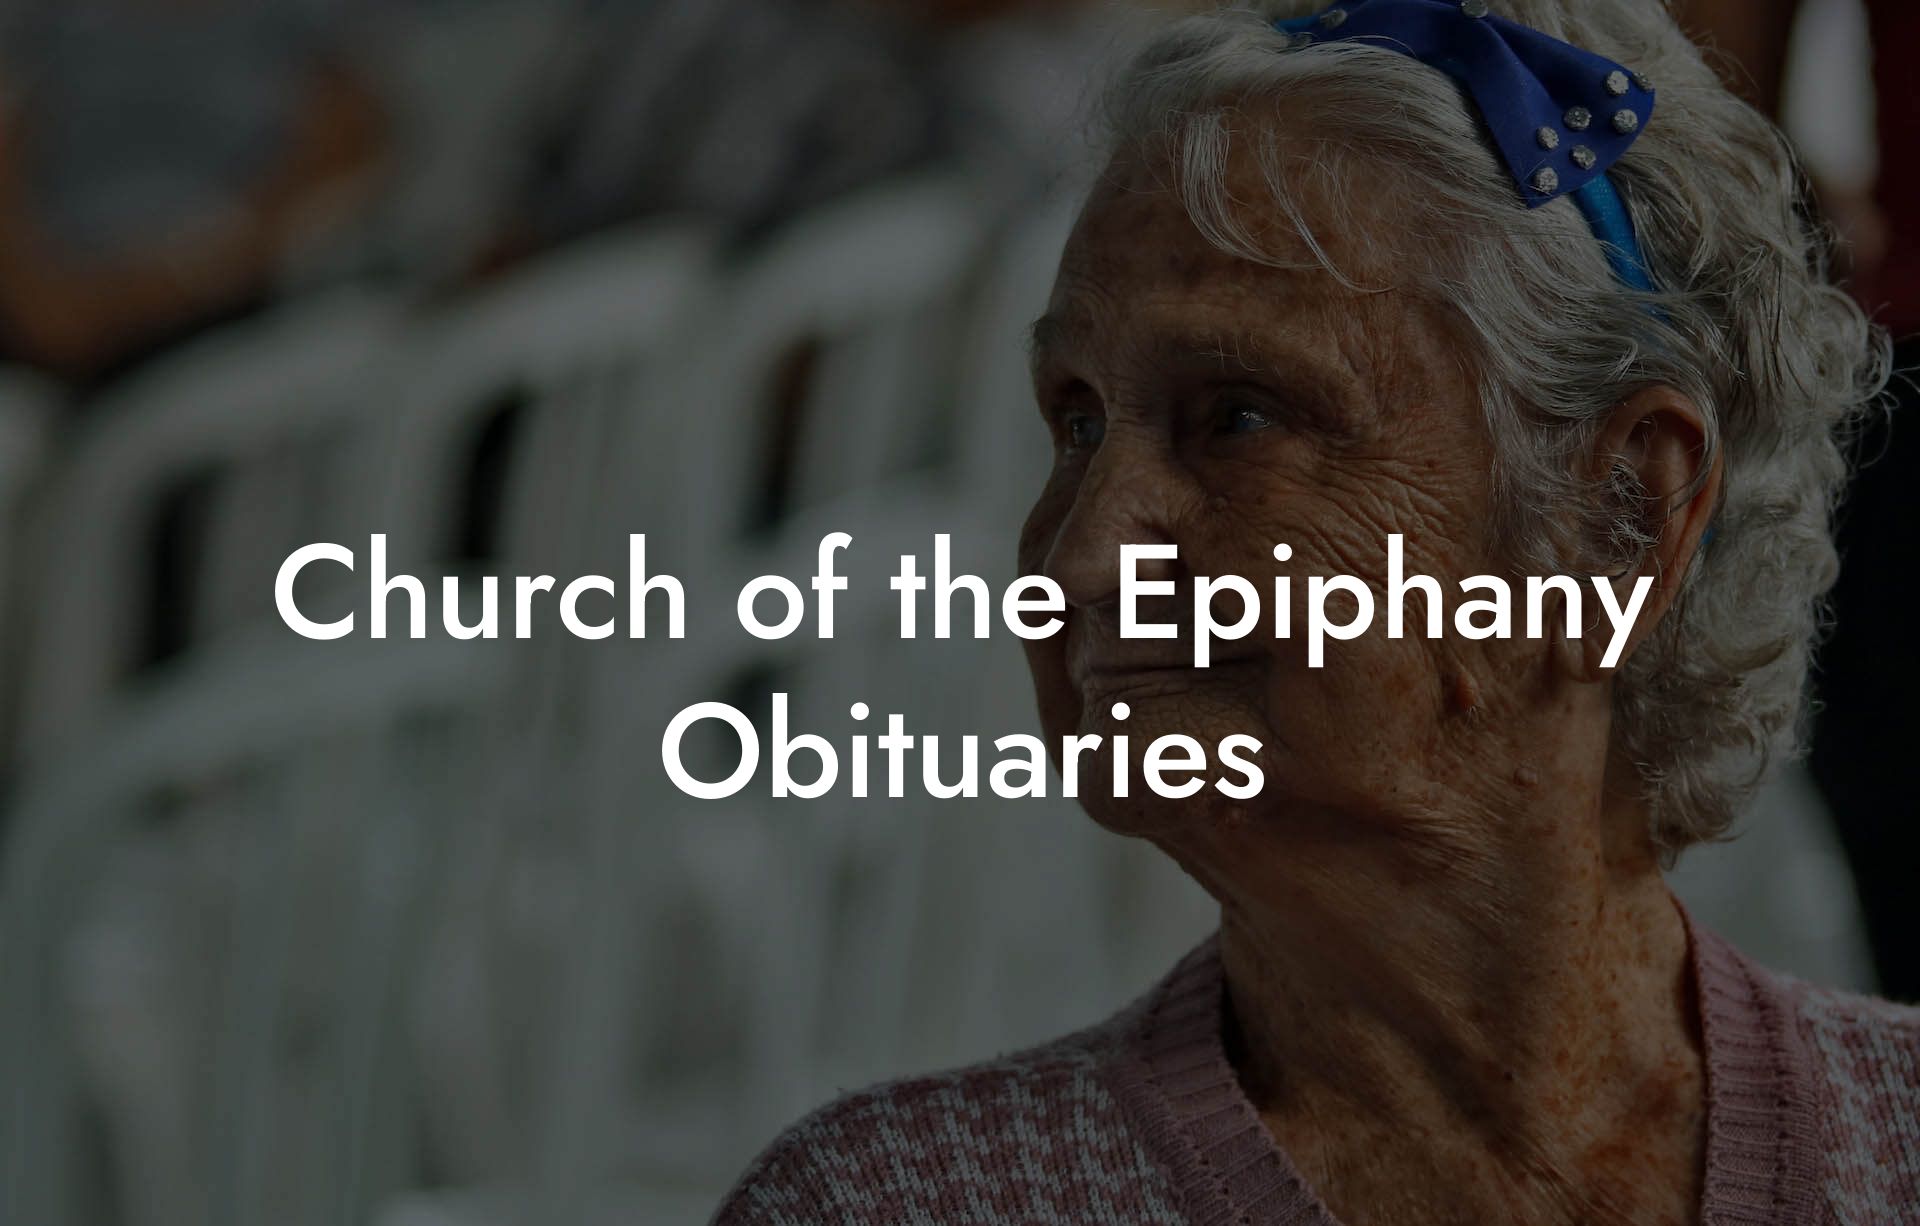 Church of the Epiphany Obituaries